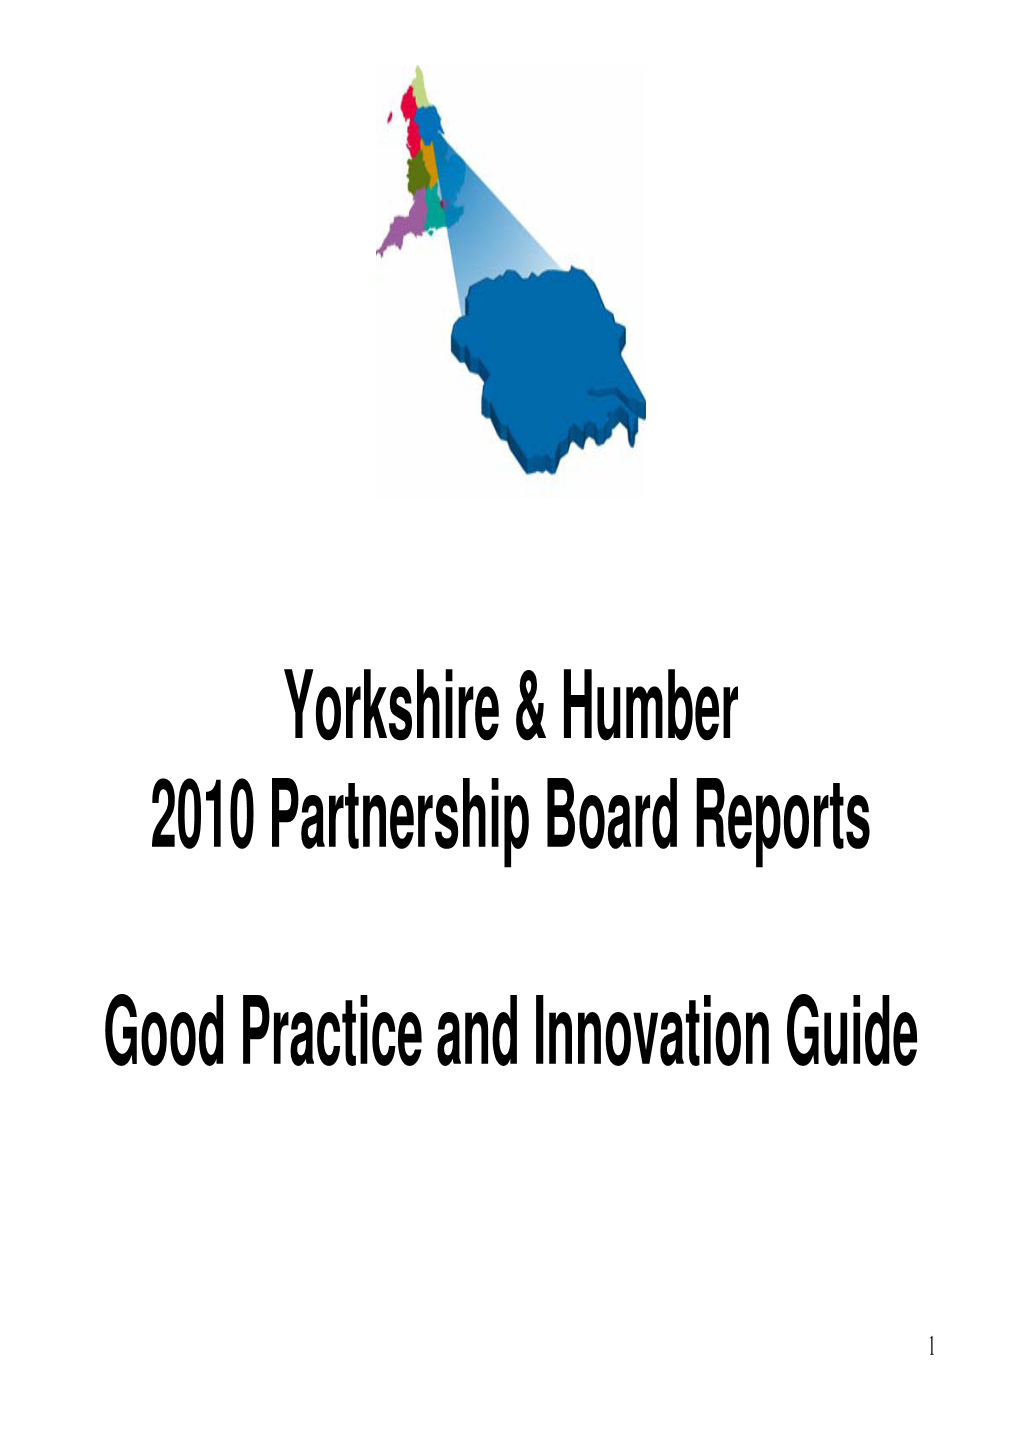 Yorkshire & Humber 2010 Partnership Board Reports Good Practice And